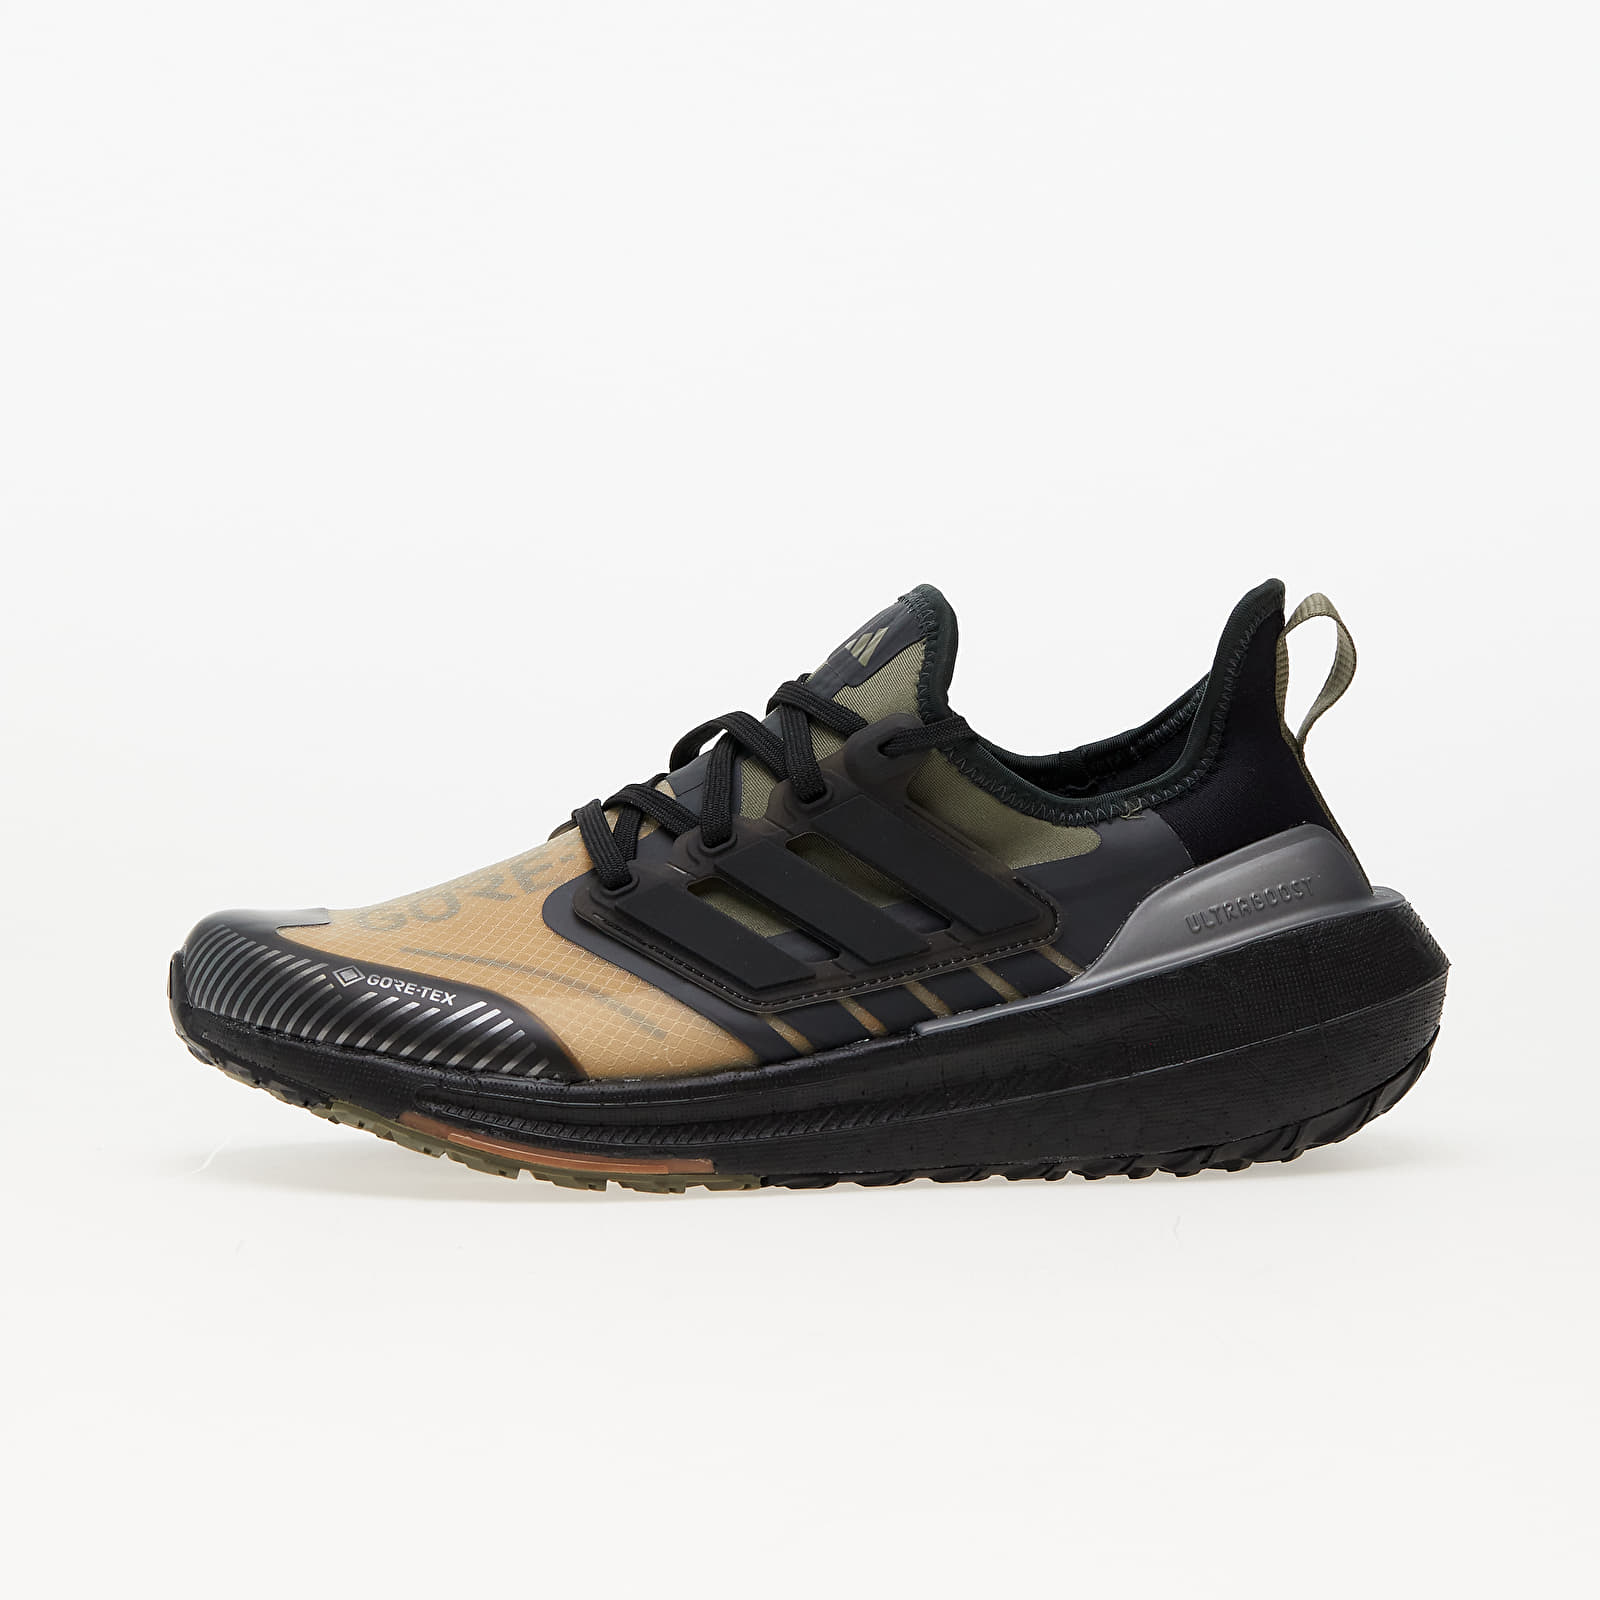 Men's shoes adidas UltraBOOST Light GTX Preloved Yellow/ Core Black/ Olive Strata